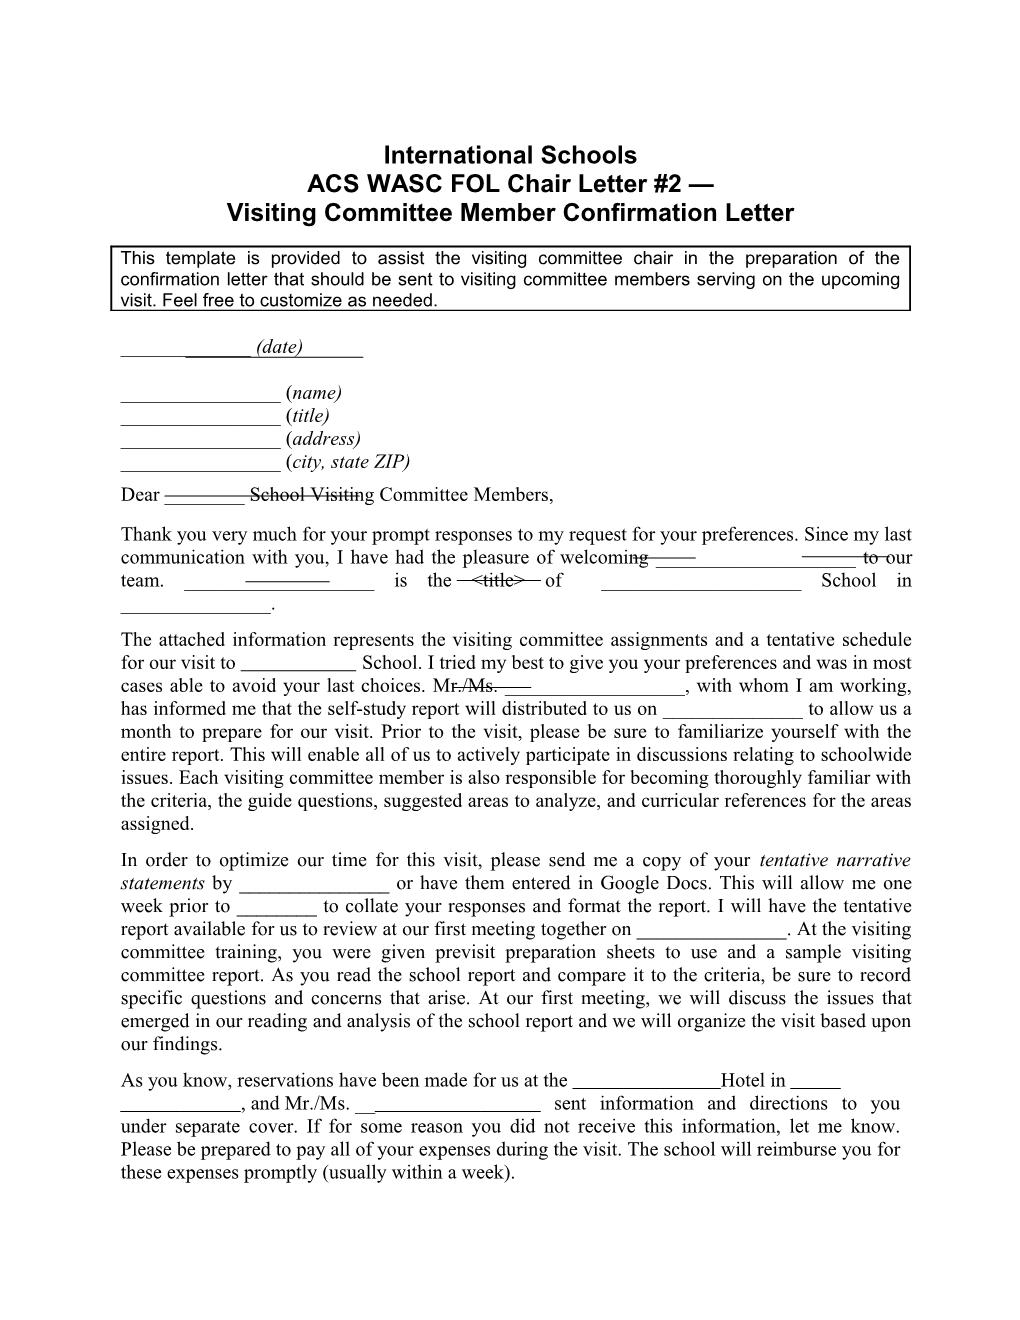 Internationalschools ACS WASC Folchair Letter #2 Visiting Committee Member Confirmation Letter